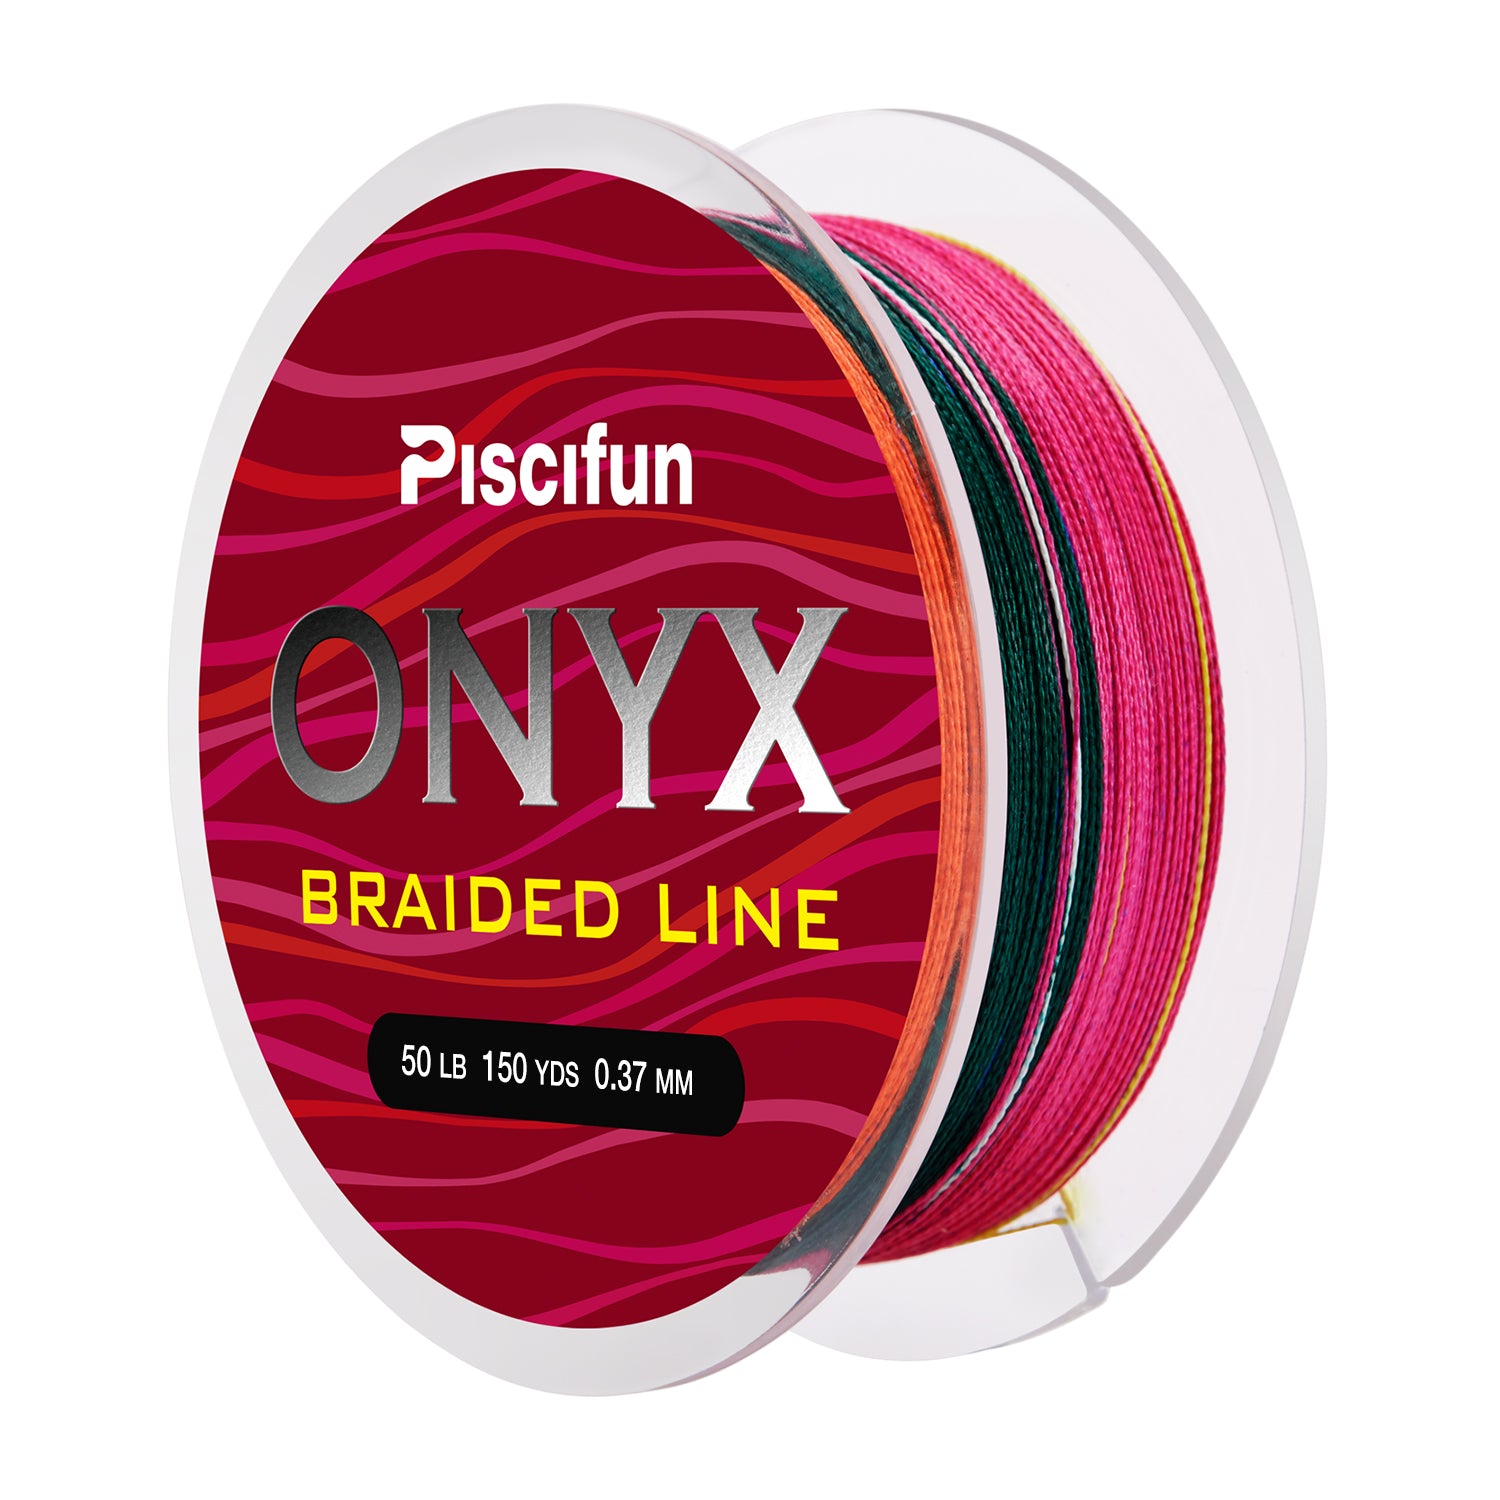 Piscifun Lunker Fishing Braided Line 274M - Finish-Tackle